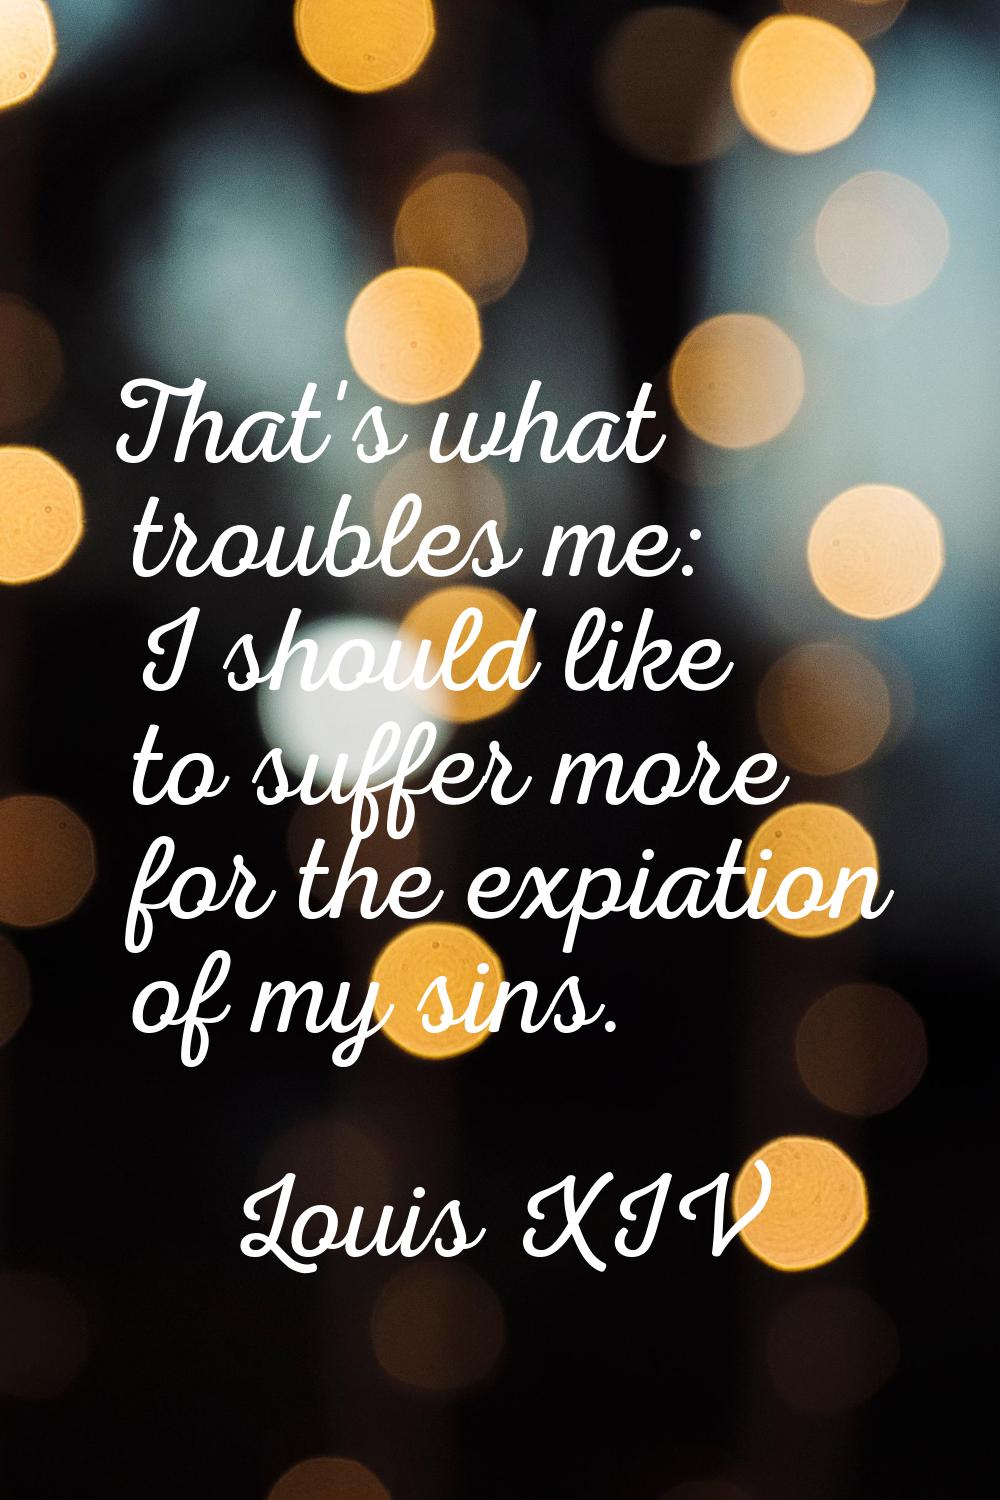 That's what troubles me: I should like to suffer more for the expiation of my sins.